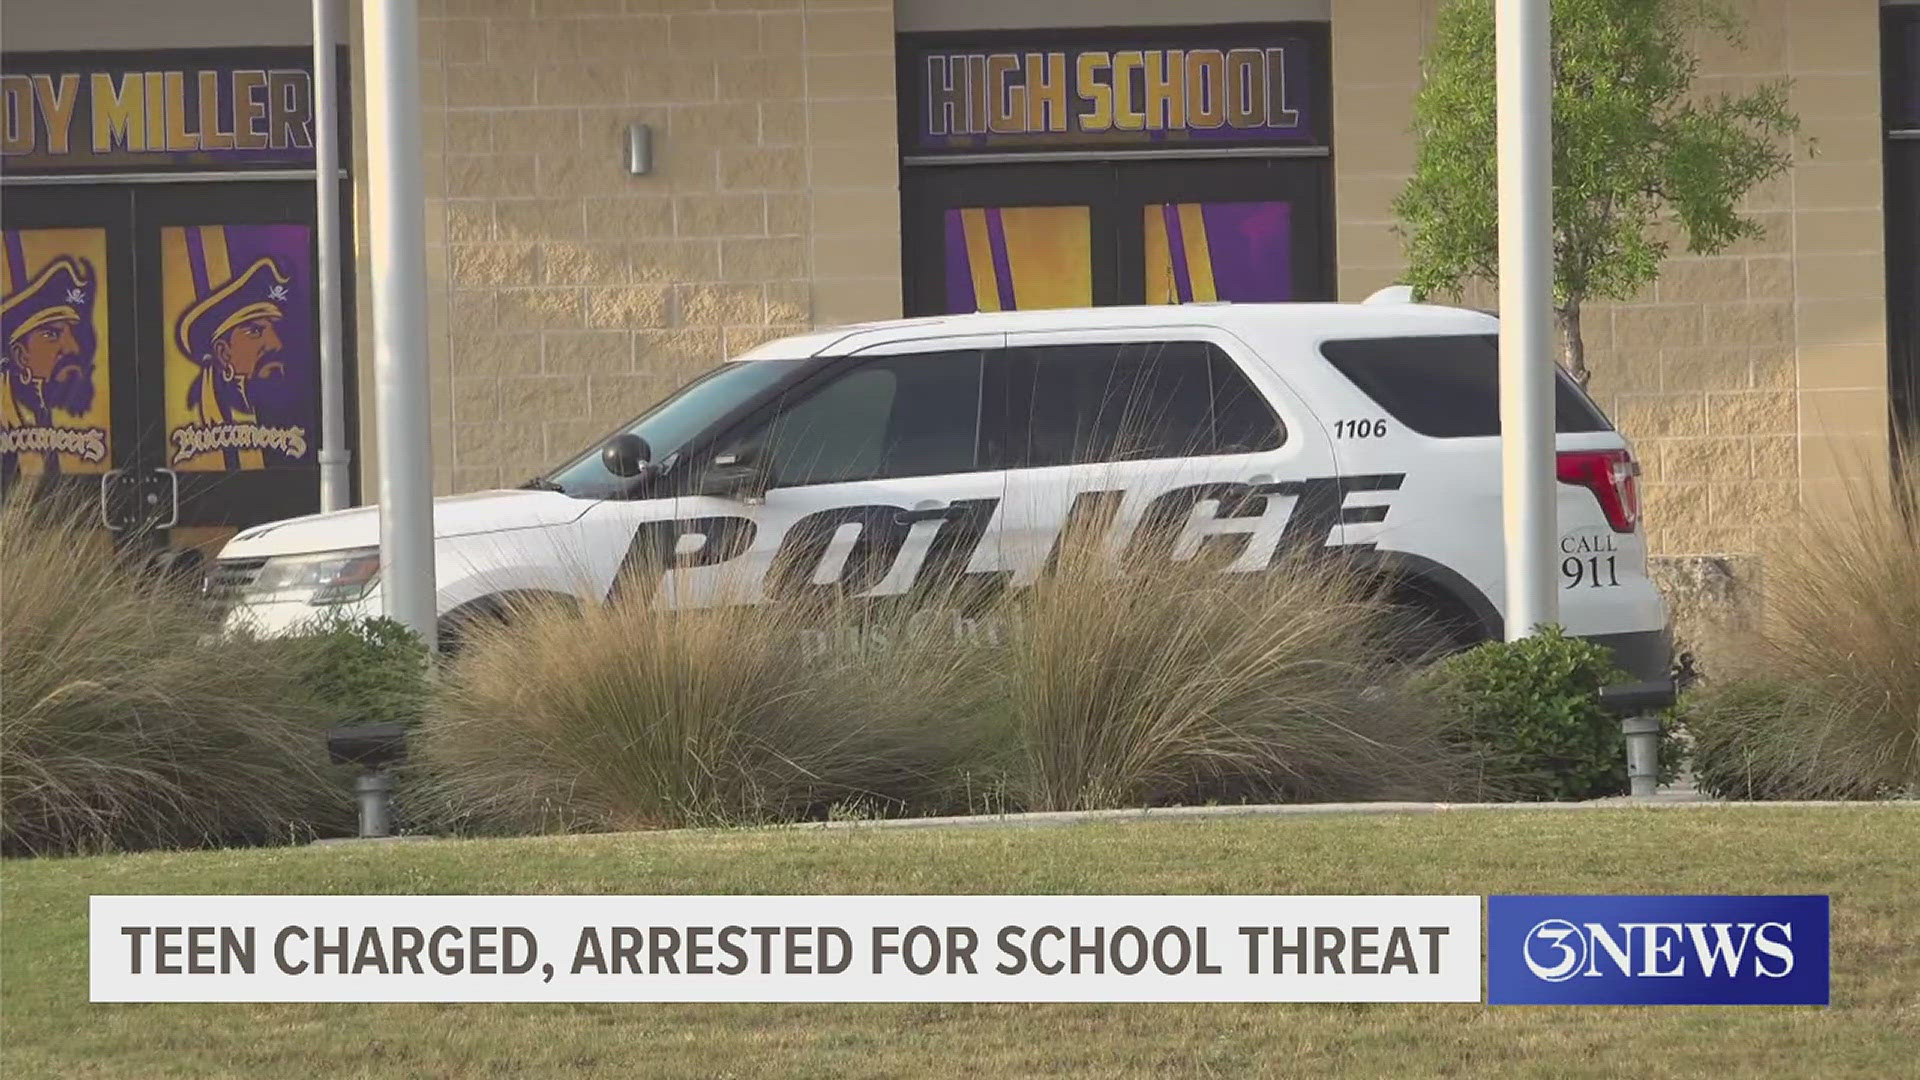 CCISD Police officials told 3NEWS they searched the teen's home and found no weapons inside.